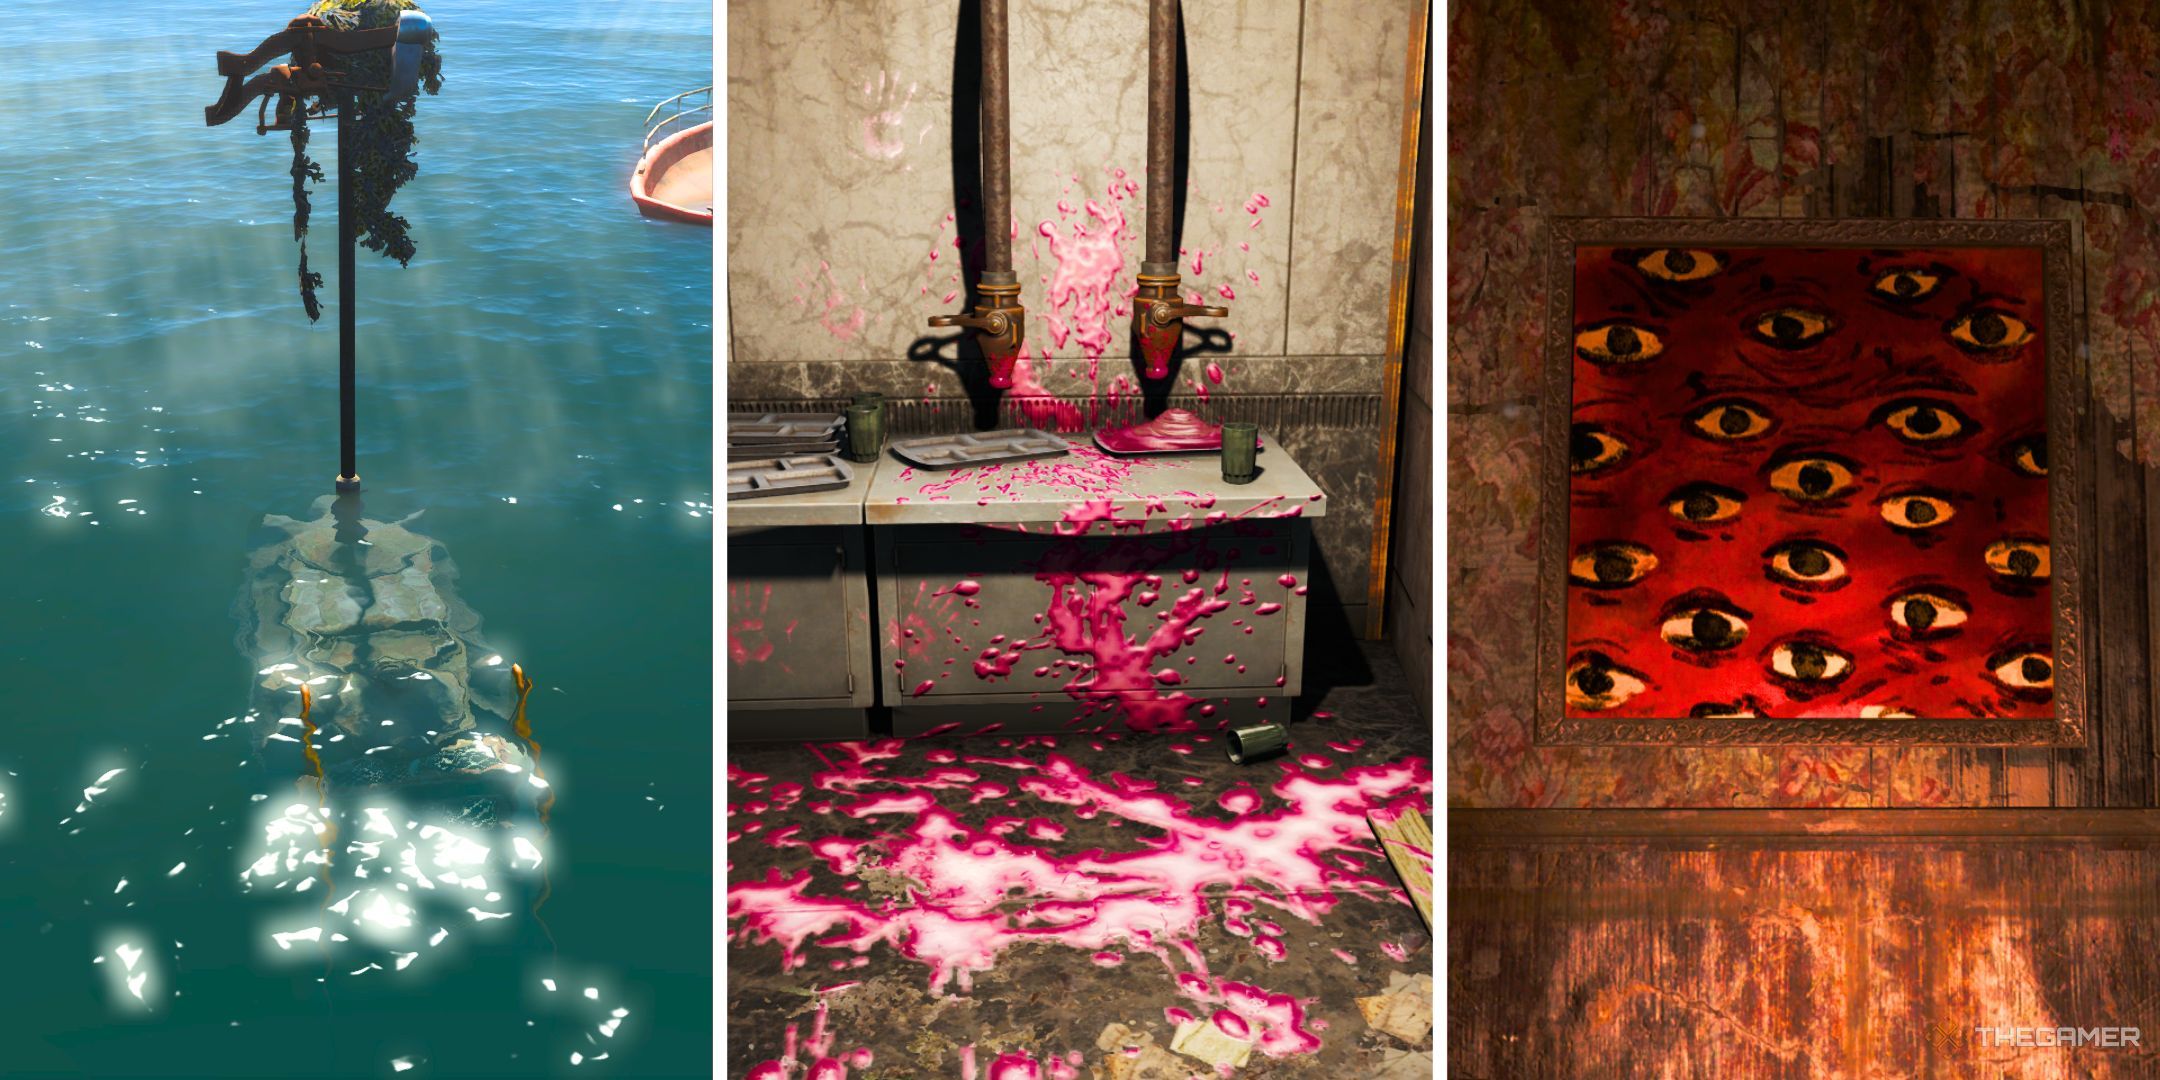 Three sliced images, showing a submarine under the ocean's blue surface, two tubes with pink goo everywhere, and a red painting with multiple eyes.